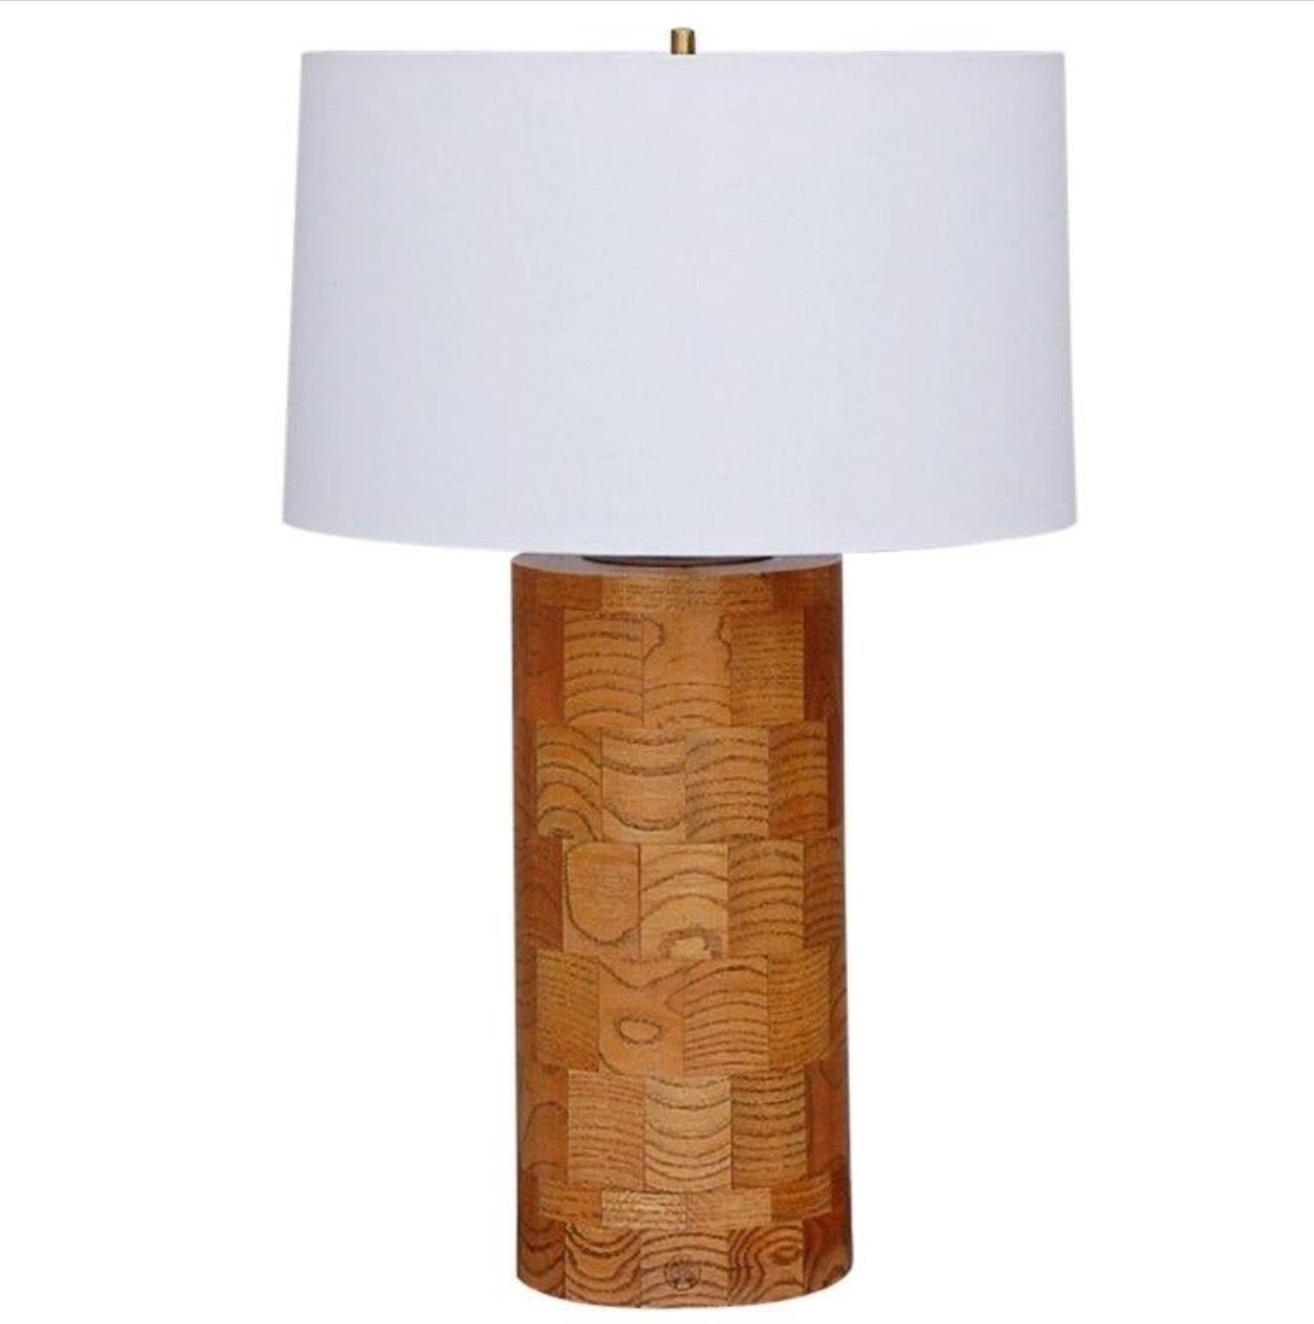 Large oak patchwork table lamp by Amter Craft. Stamped. Shade dimensions: 12